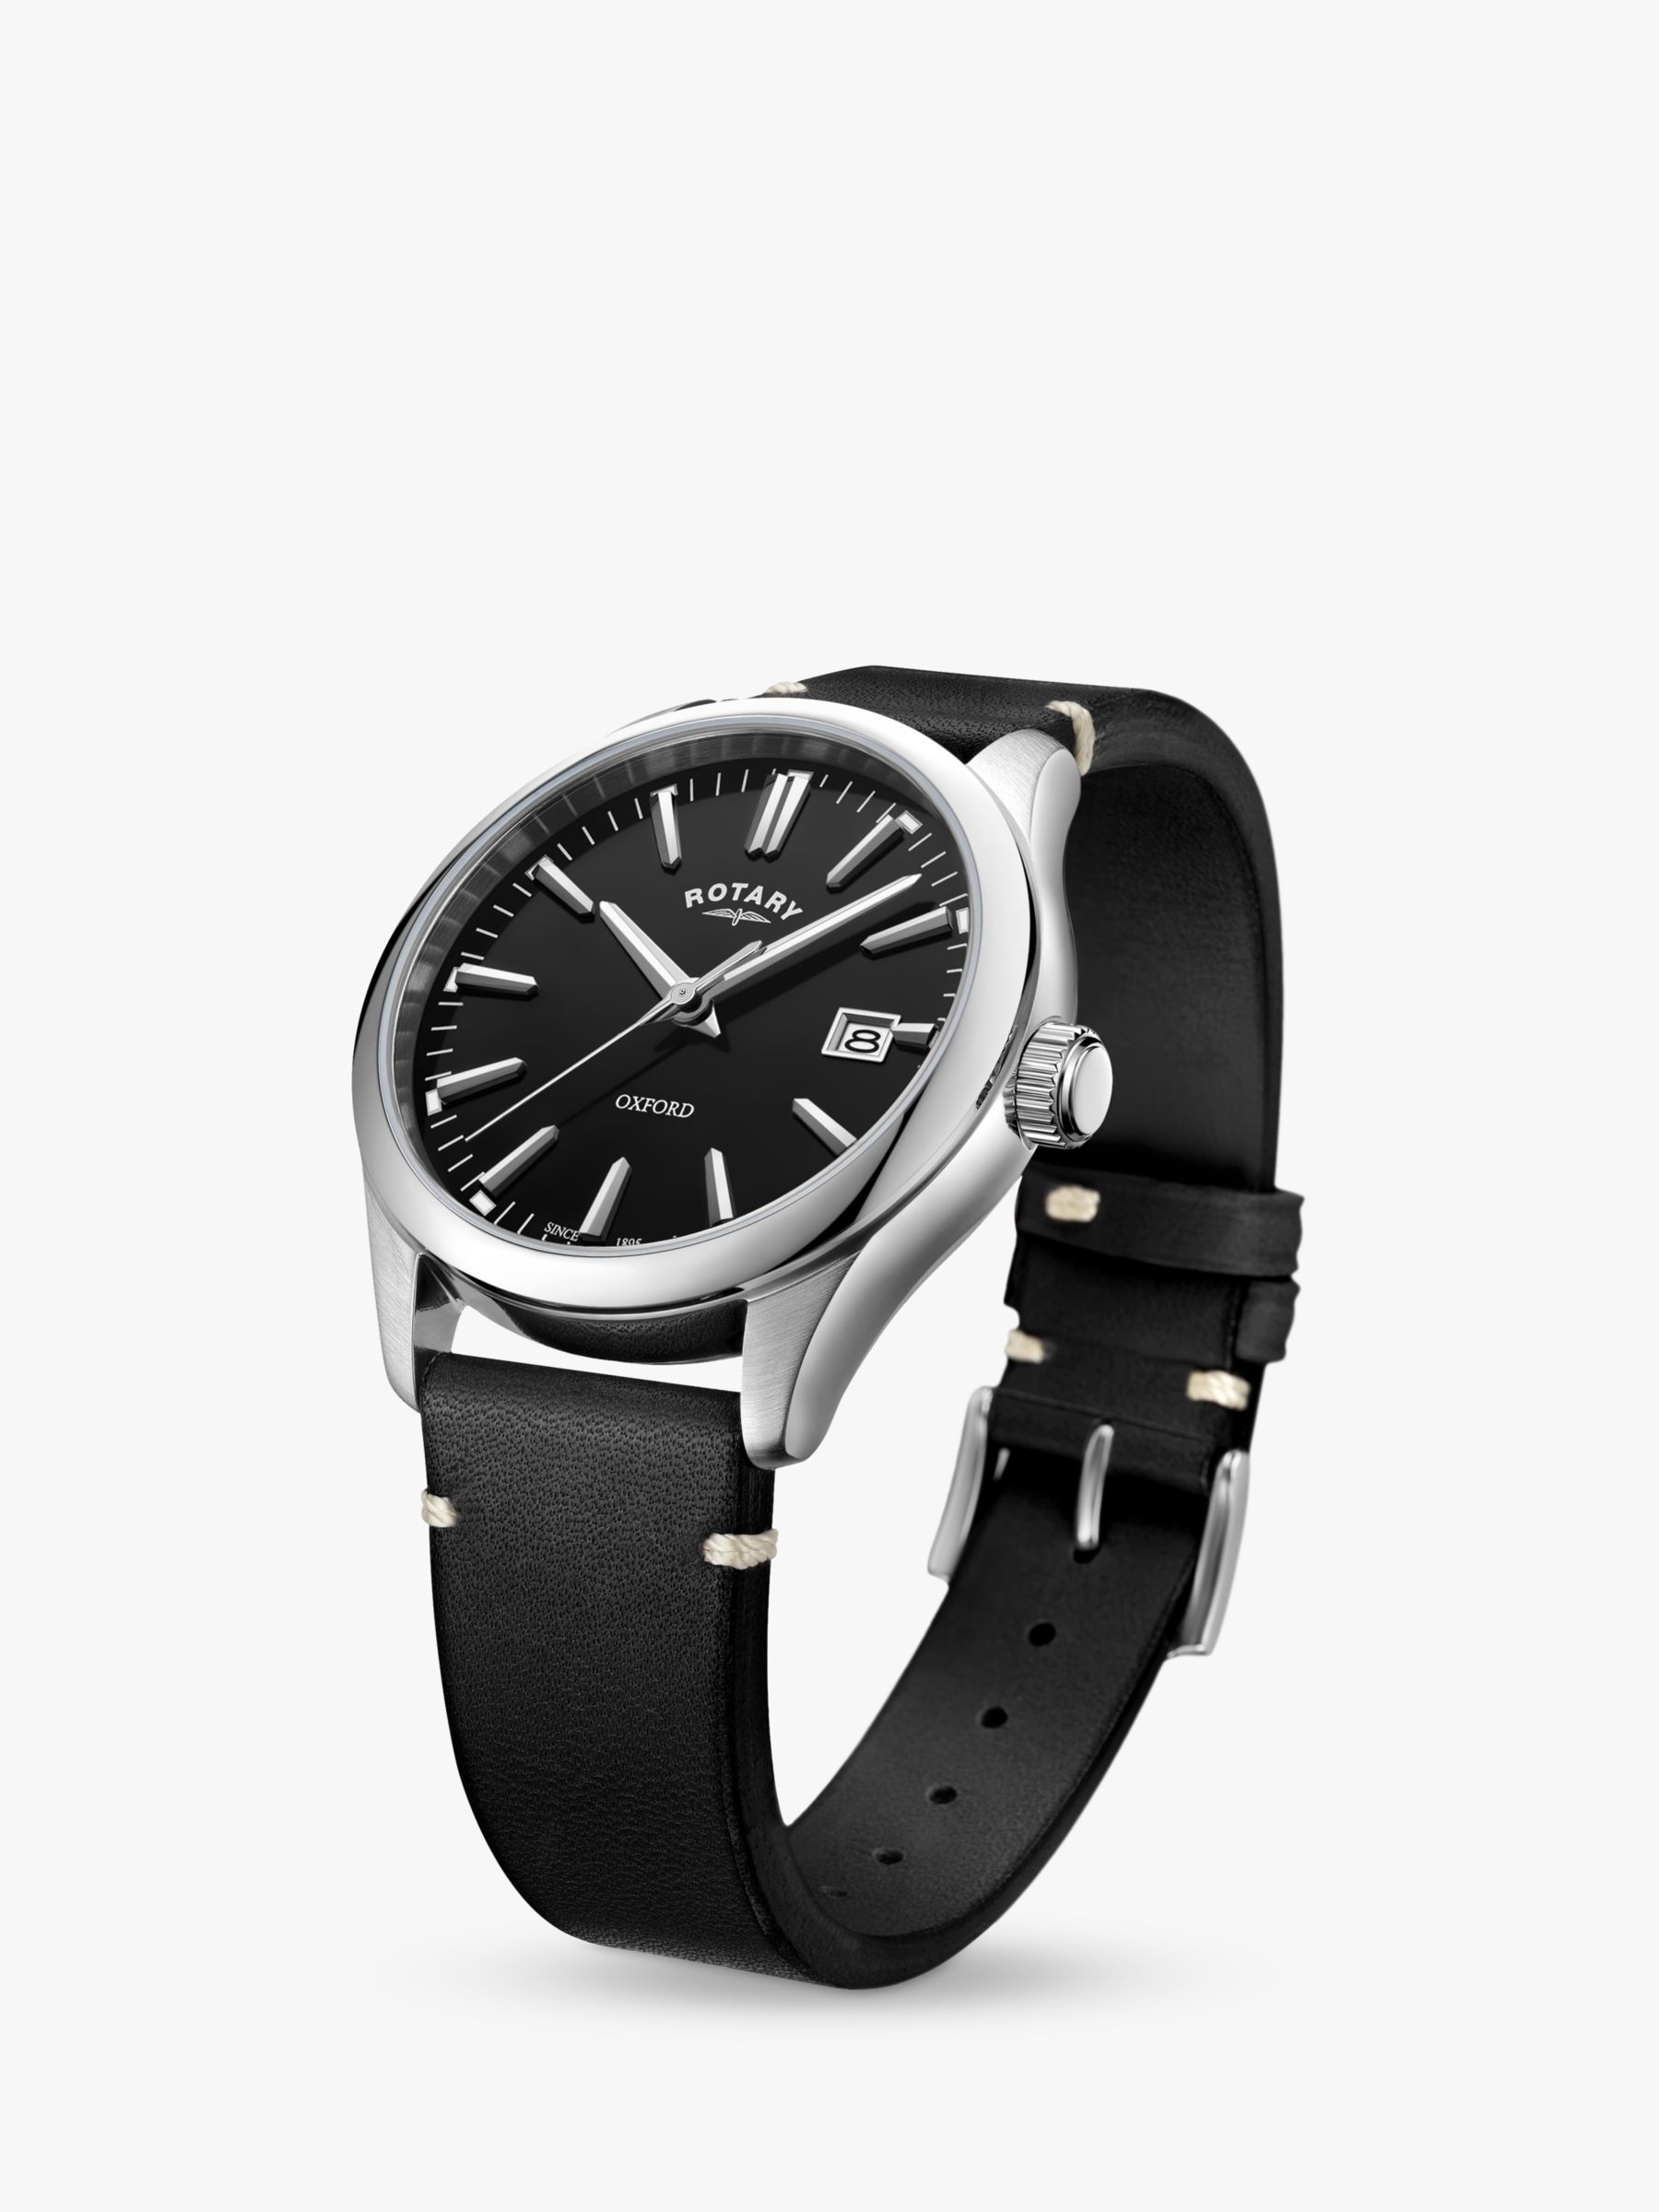 Buy Rotary Men's Oxford Date Leather Strap Watch Online at johnlewis.com